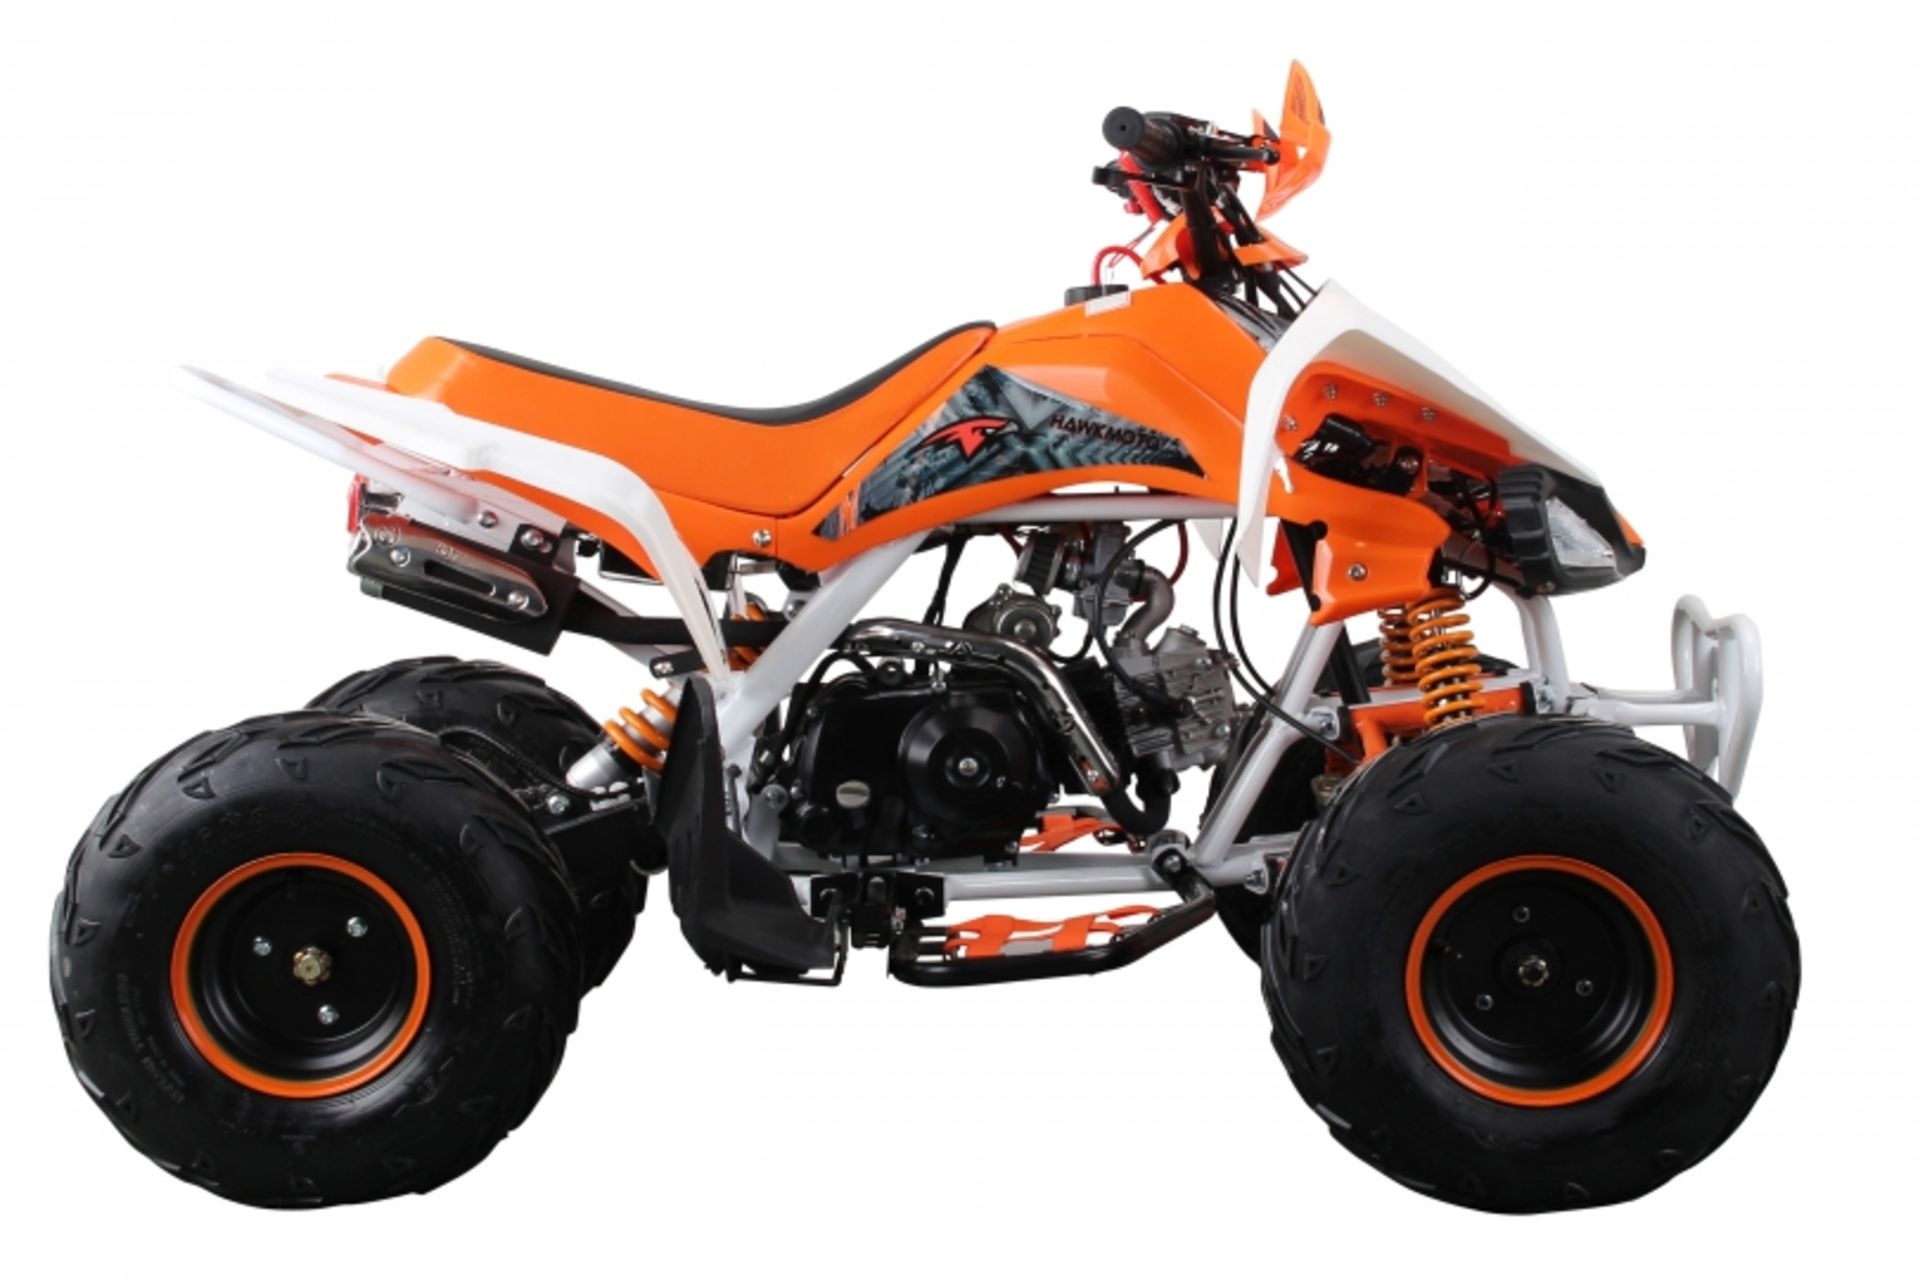 V Brand New 125cc Interceptor SV2 4 Stroke Quad Bike With Reverse Gear - Double Front Suspension/ - Image 5 of 5